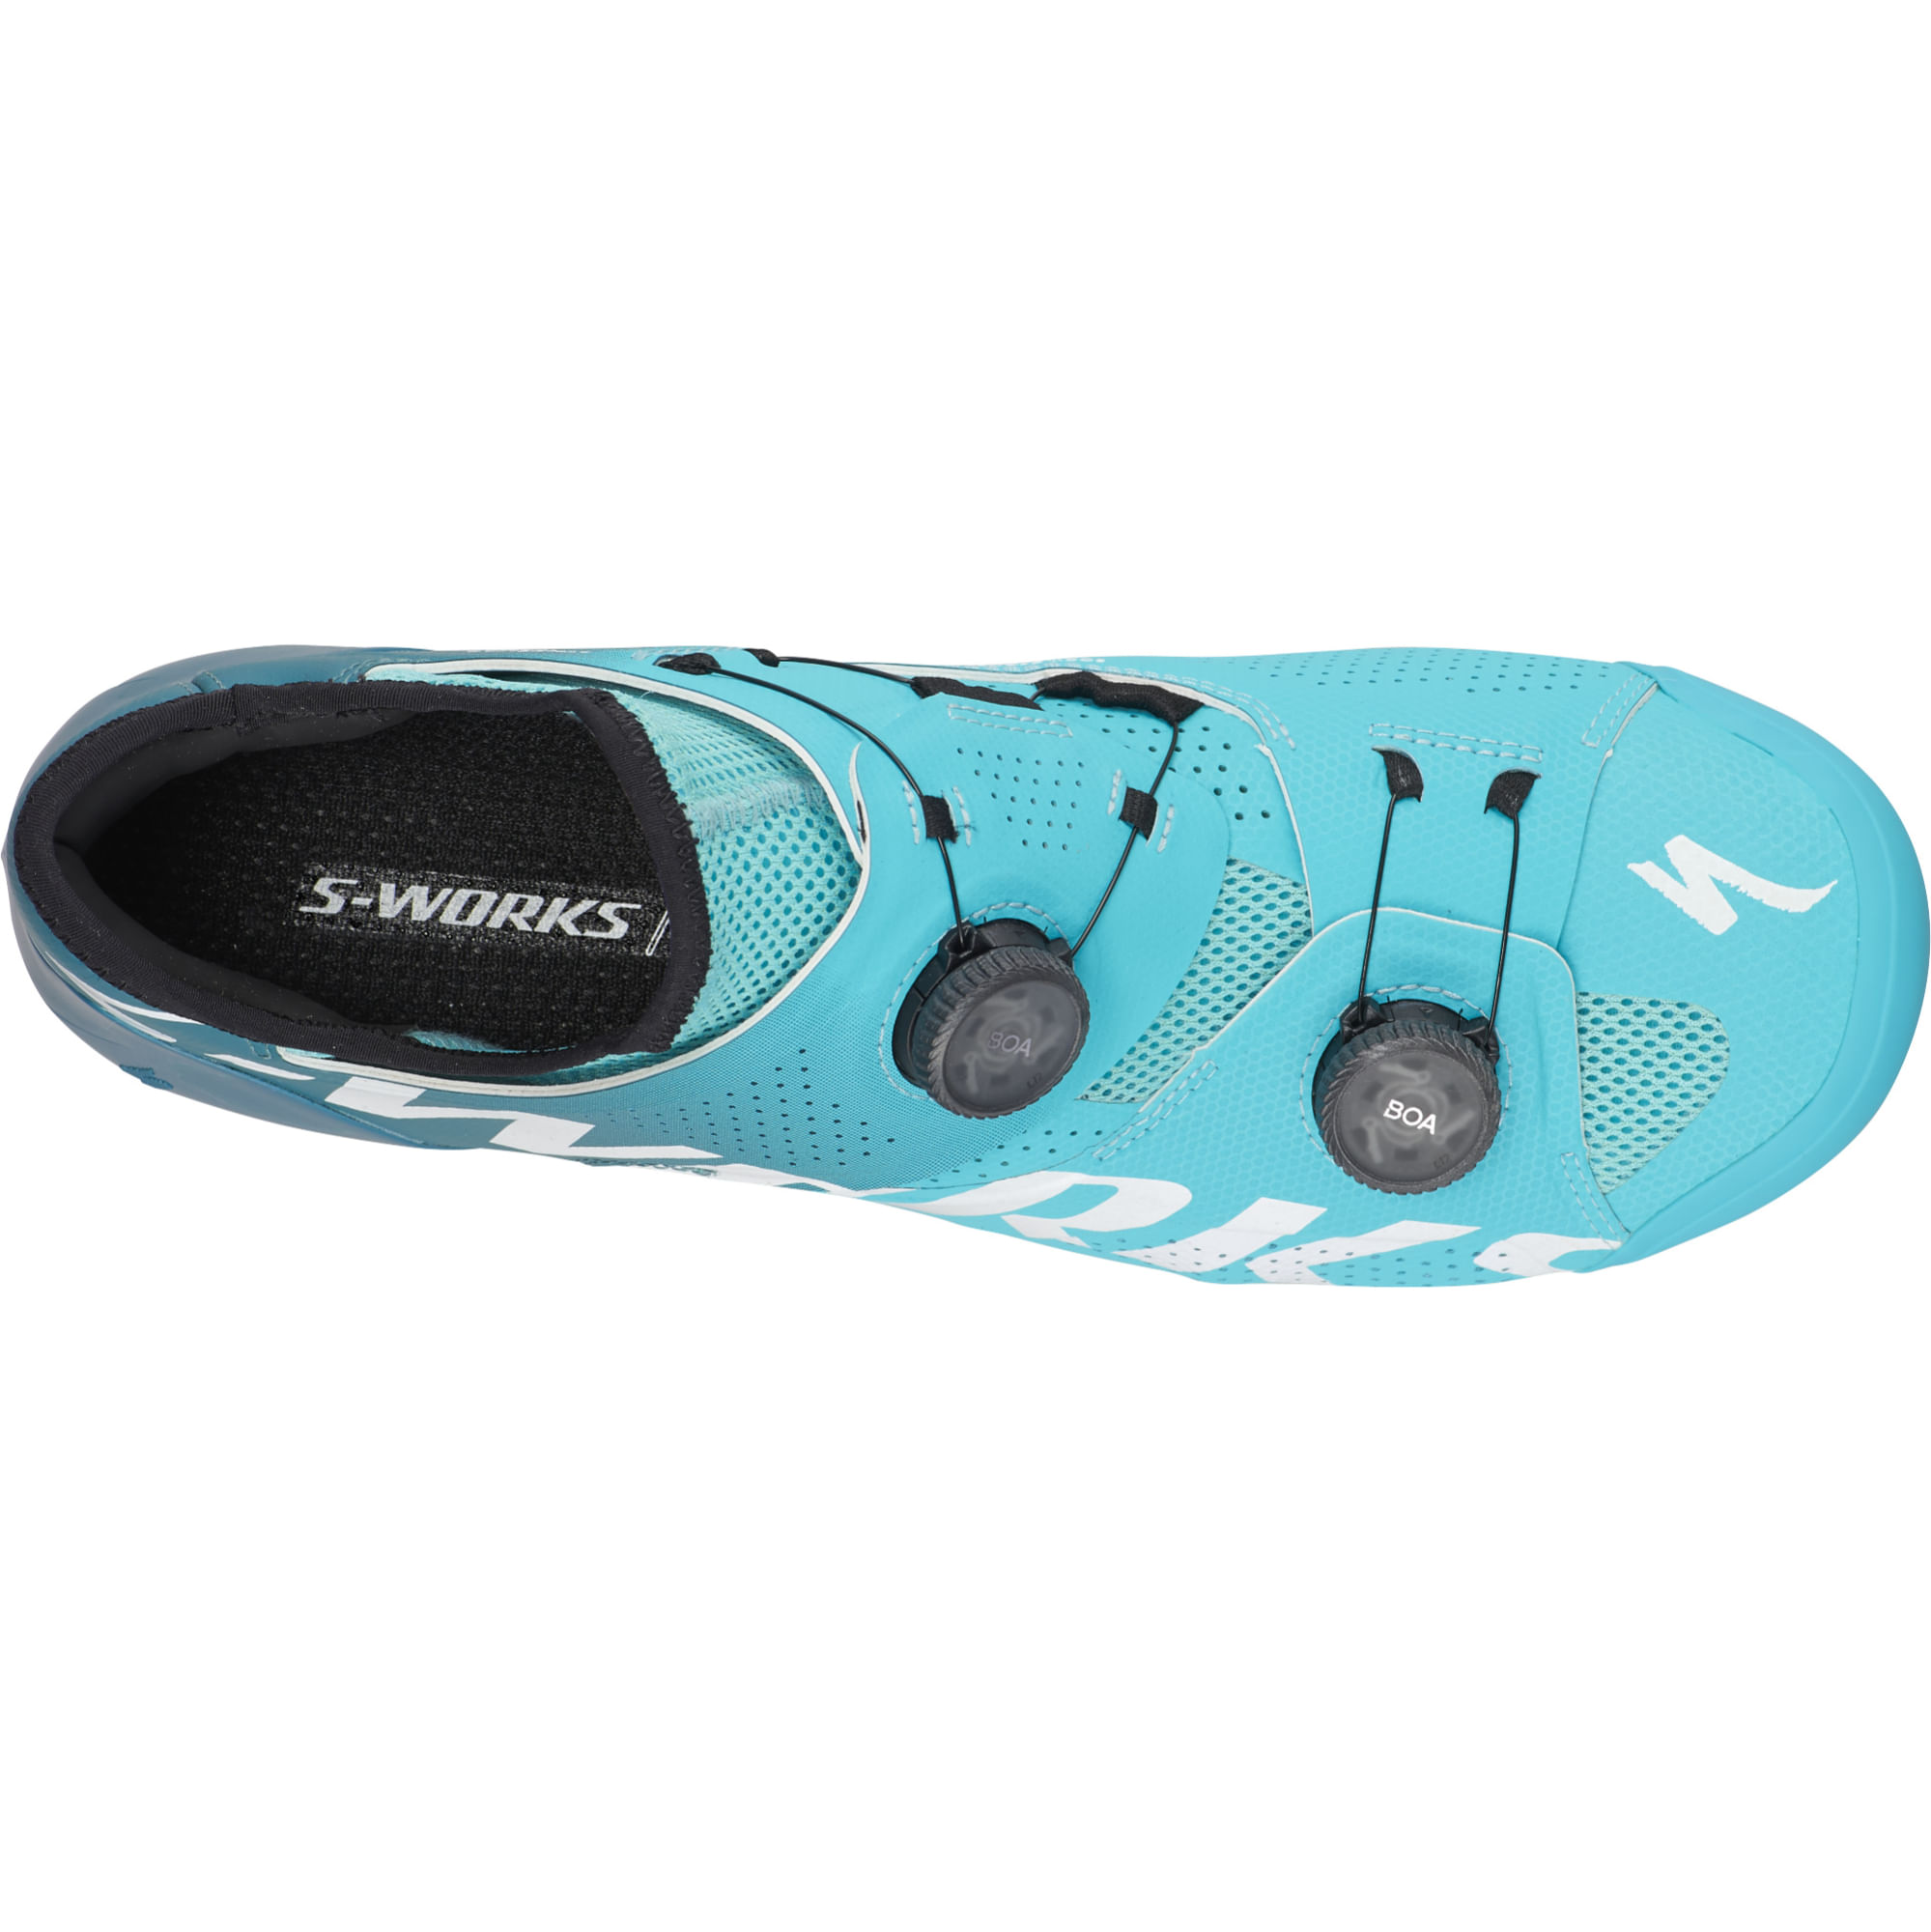 2022 S-Works ARES ROAD SHOE - LAGOON BLUE | Cycling Shoes